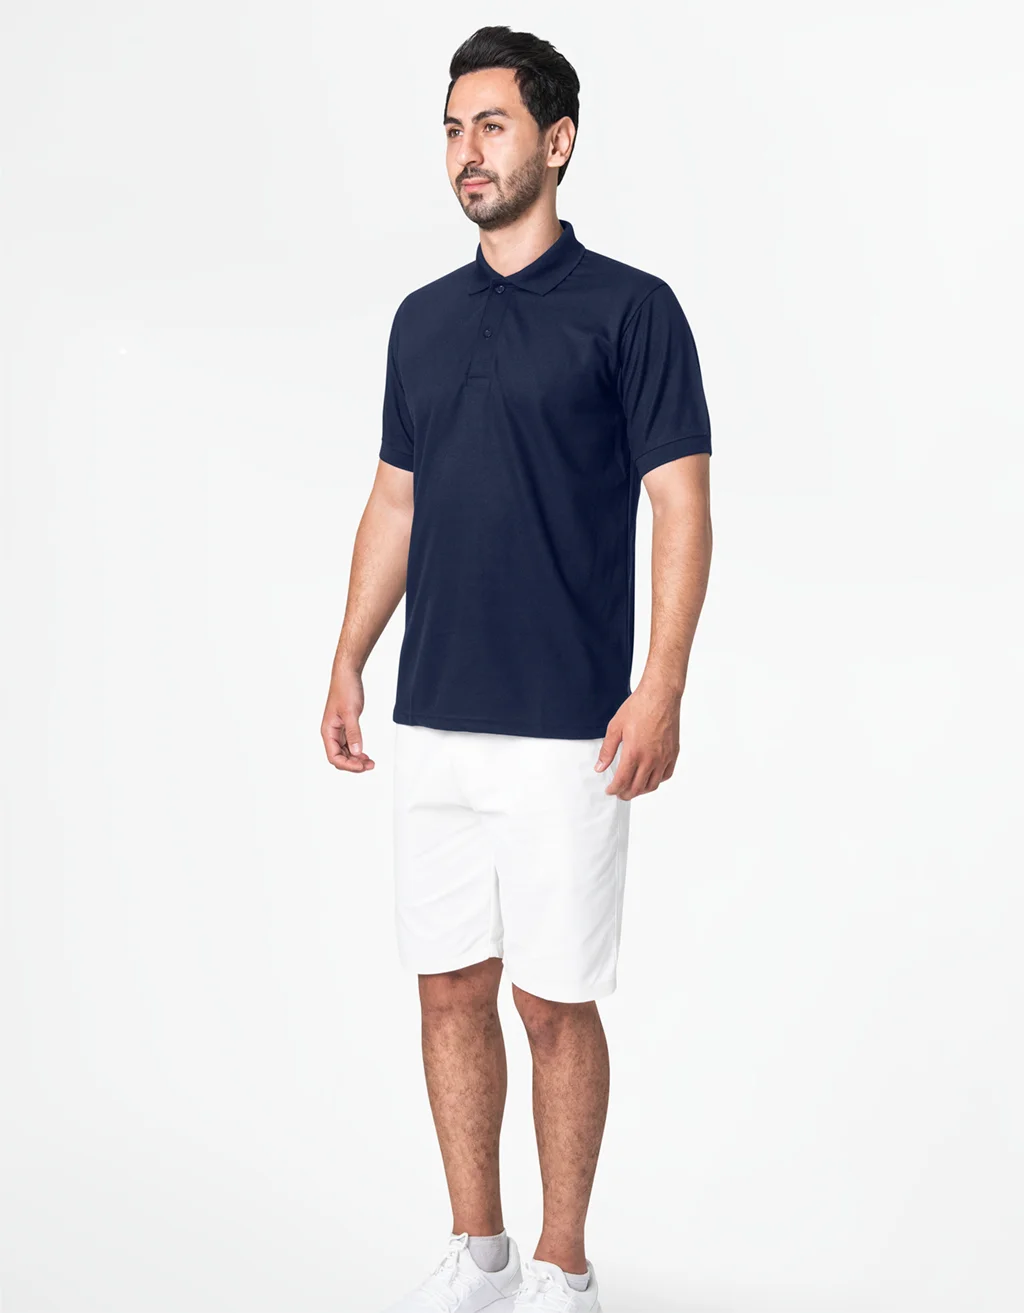 buy navy blue polo t-shirt mens buy online under 400 india